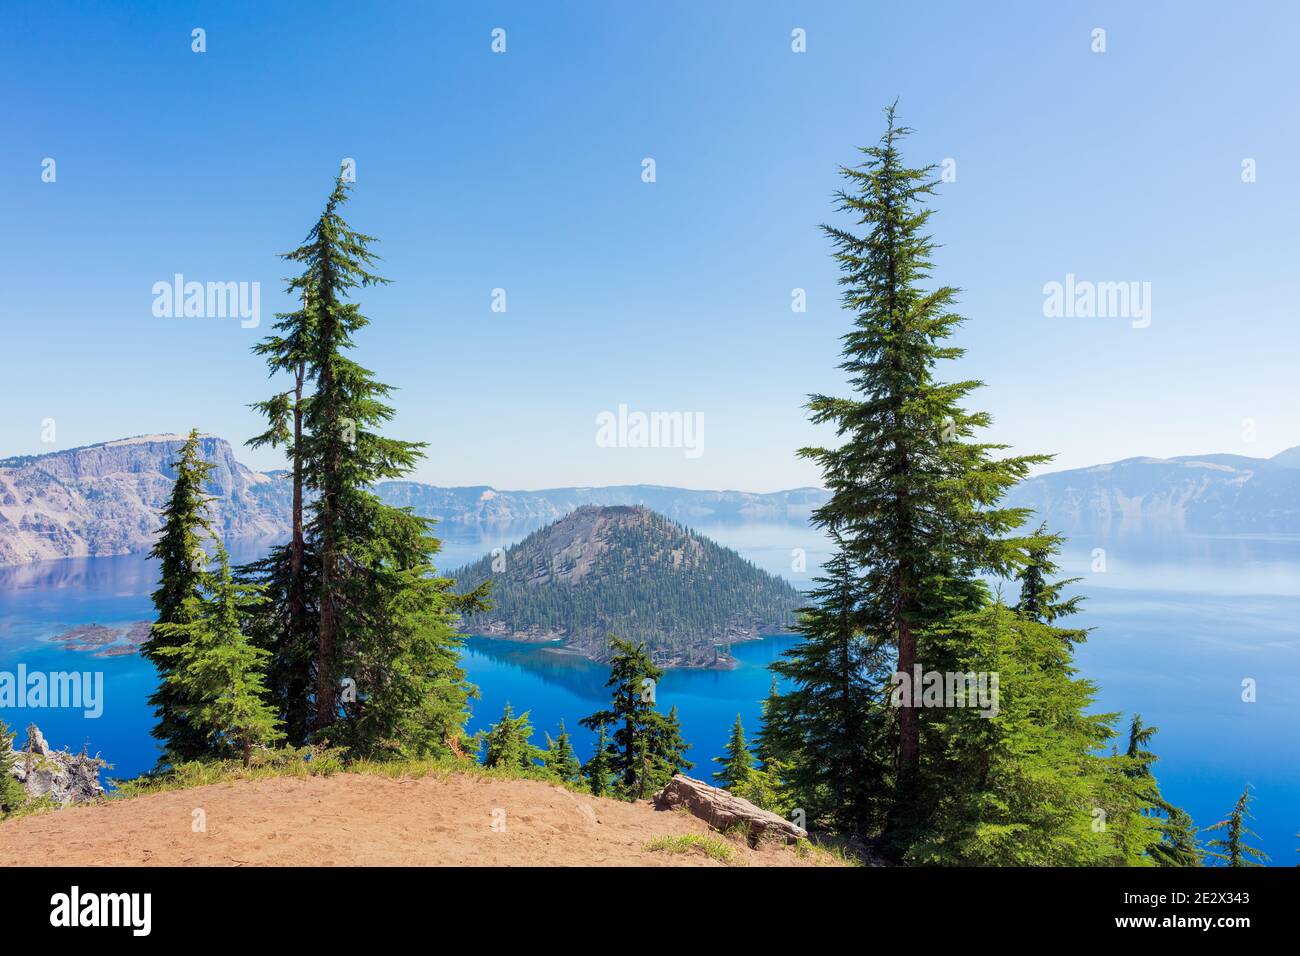 Scenic landscape and summer view of Wizard Island in Crater Lake National Park, Oregon, USA Stock Photo